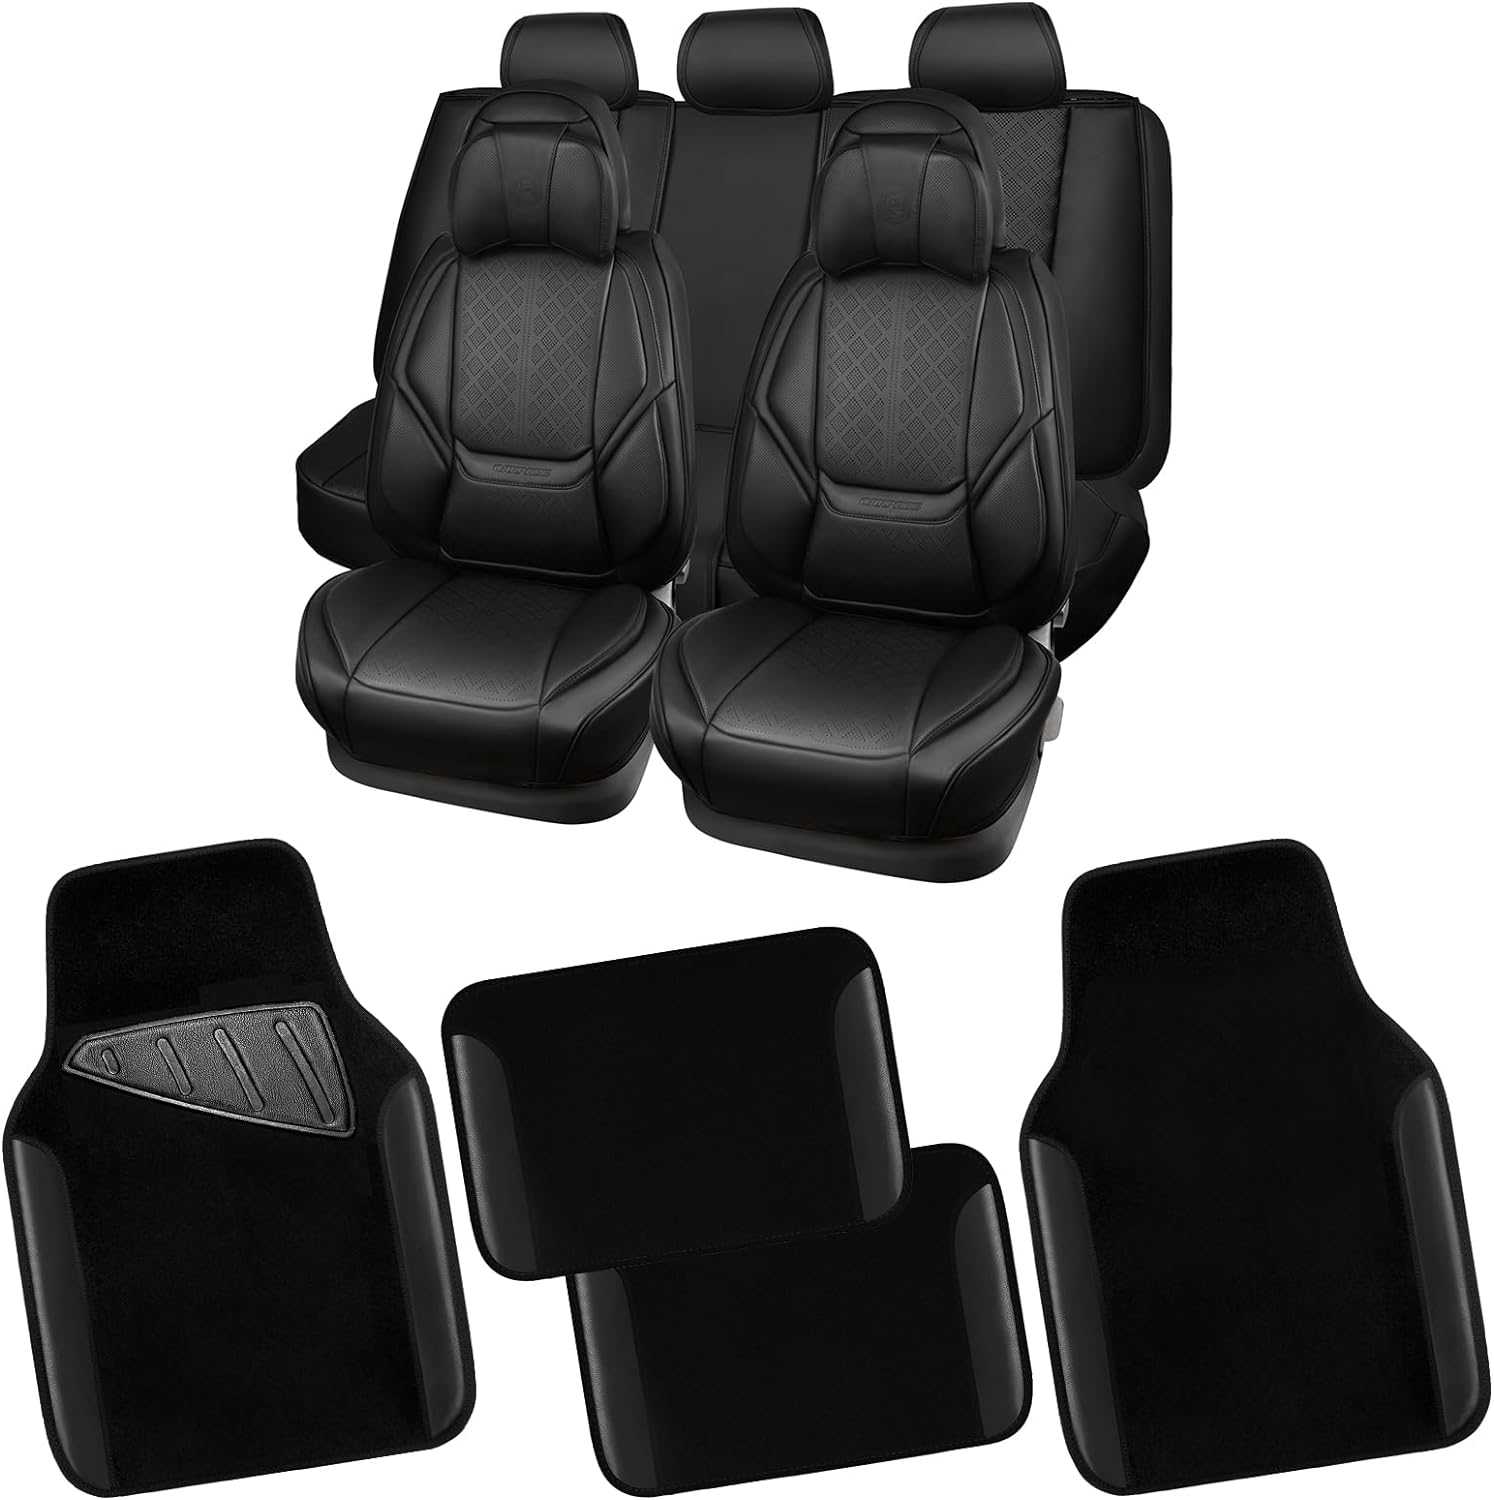 CAR PASS Nappa Leather Car Seat Covers Full Set & Car Mats, 5 Seats Universal Seat Covers for Cars, Waterproof Luxury Lumbar Support Front and Rear Seat Cover for Sedan SUV Pick-up Truck (Black)